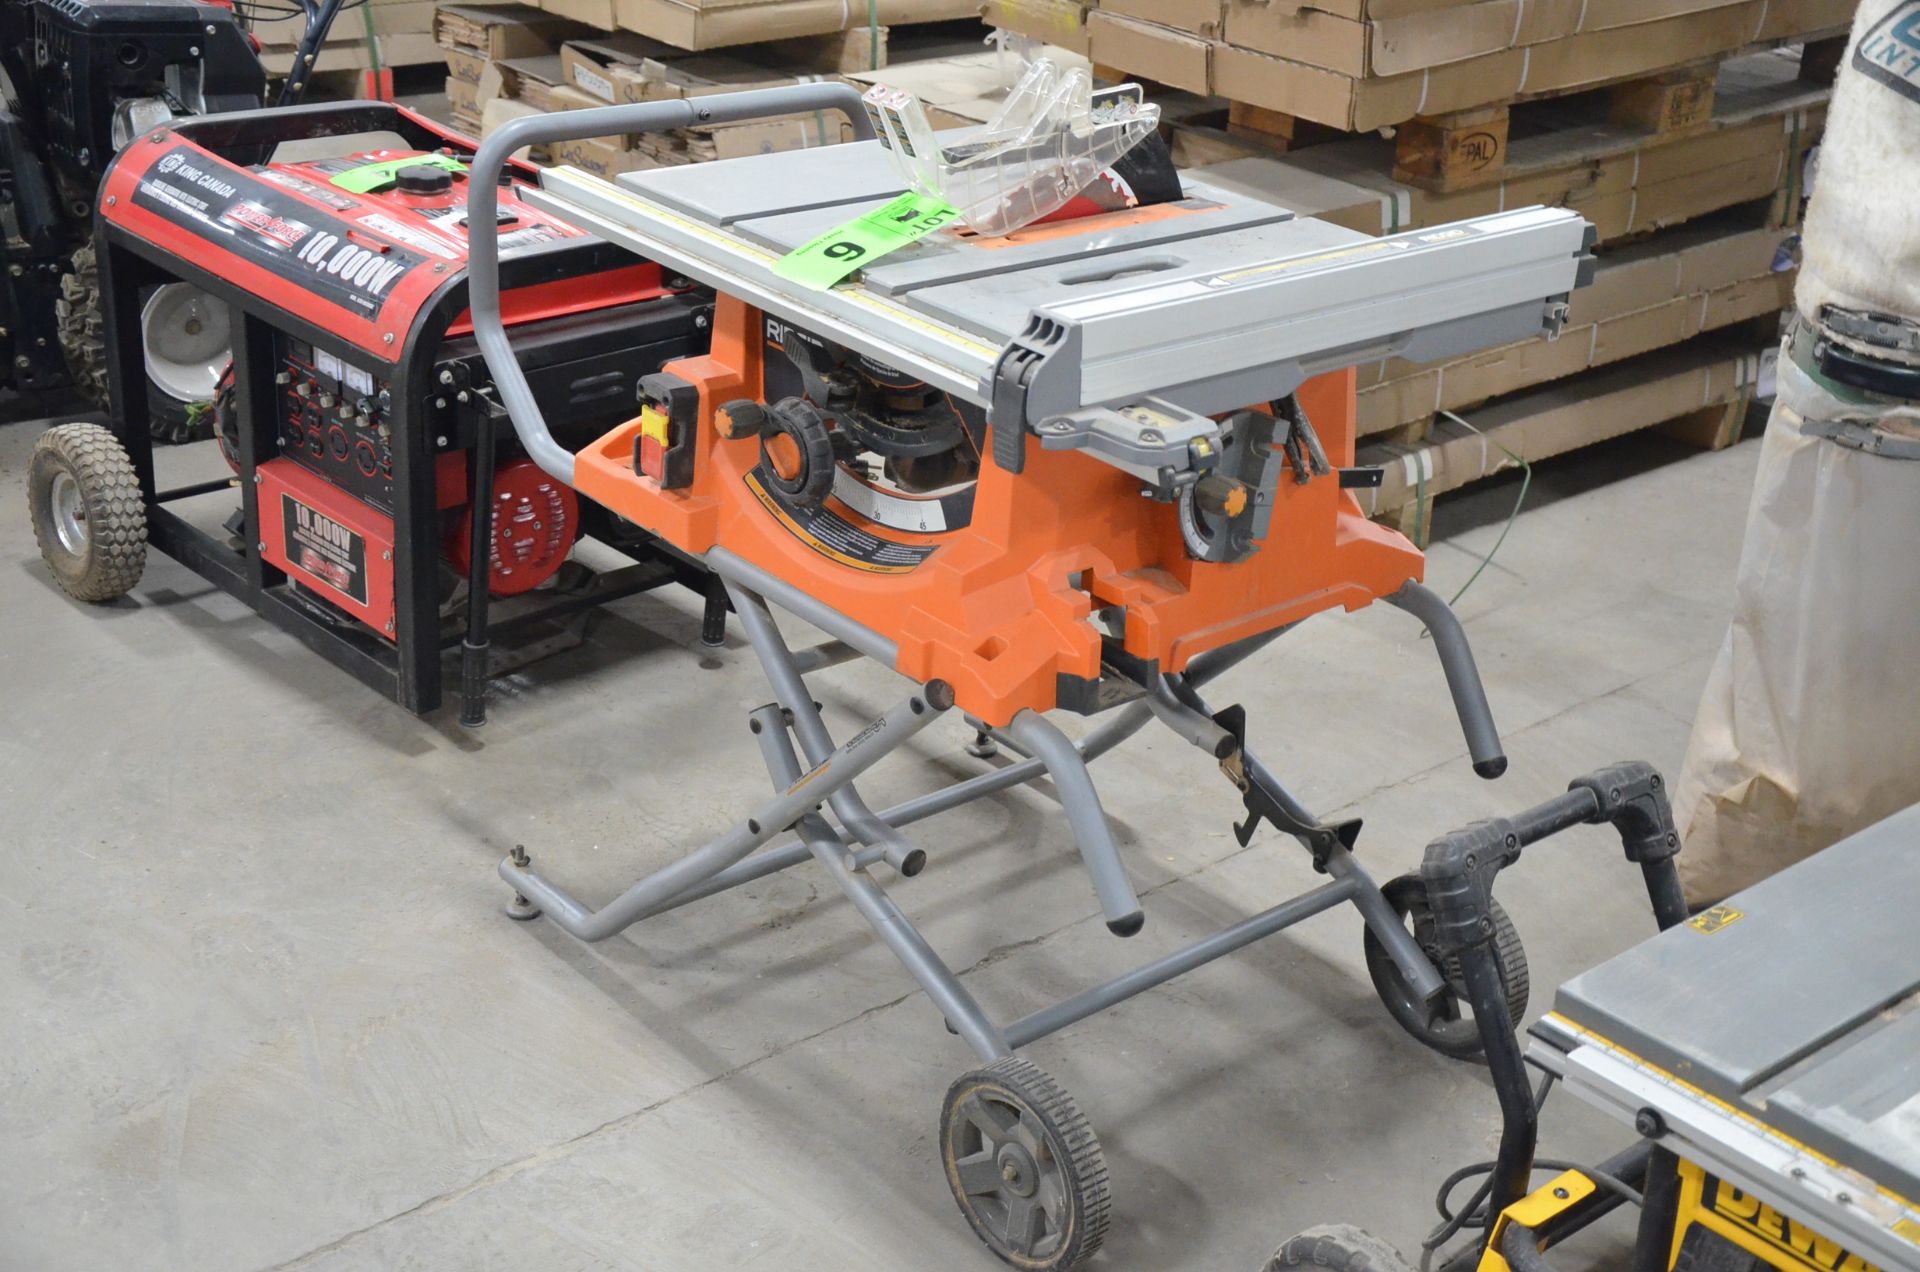 RIDGID R4513 10" PORTABLE TABLE SAW WITH STAND, S/N GW17384DC07546 - Image 2 of 4